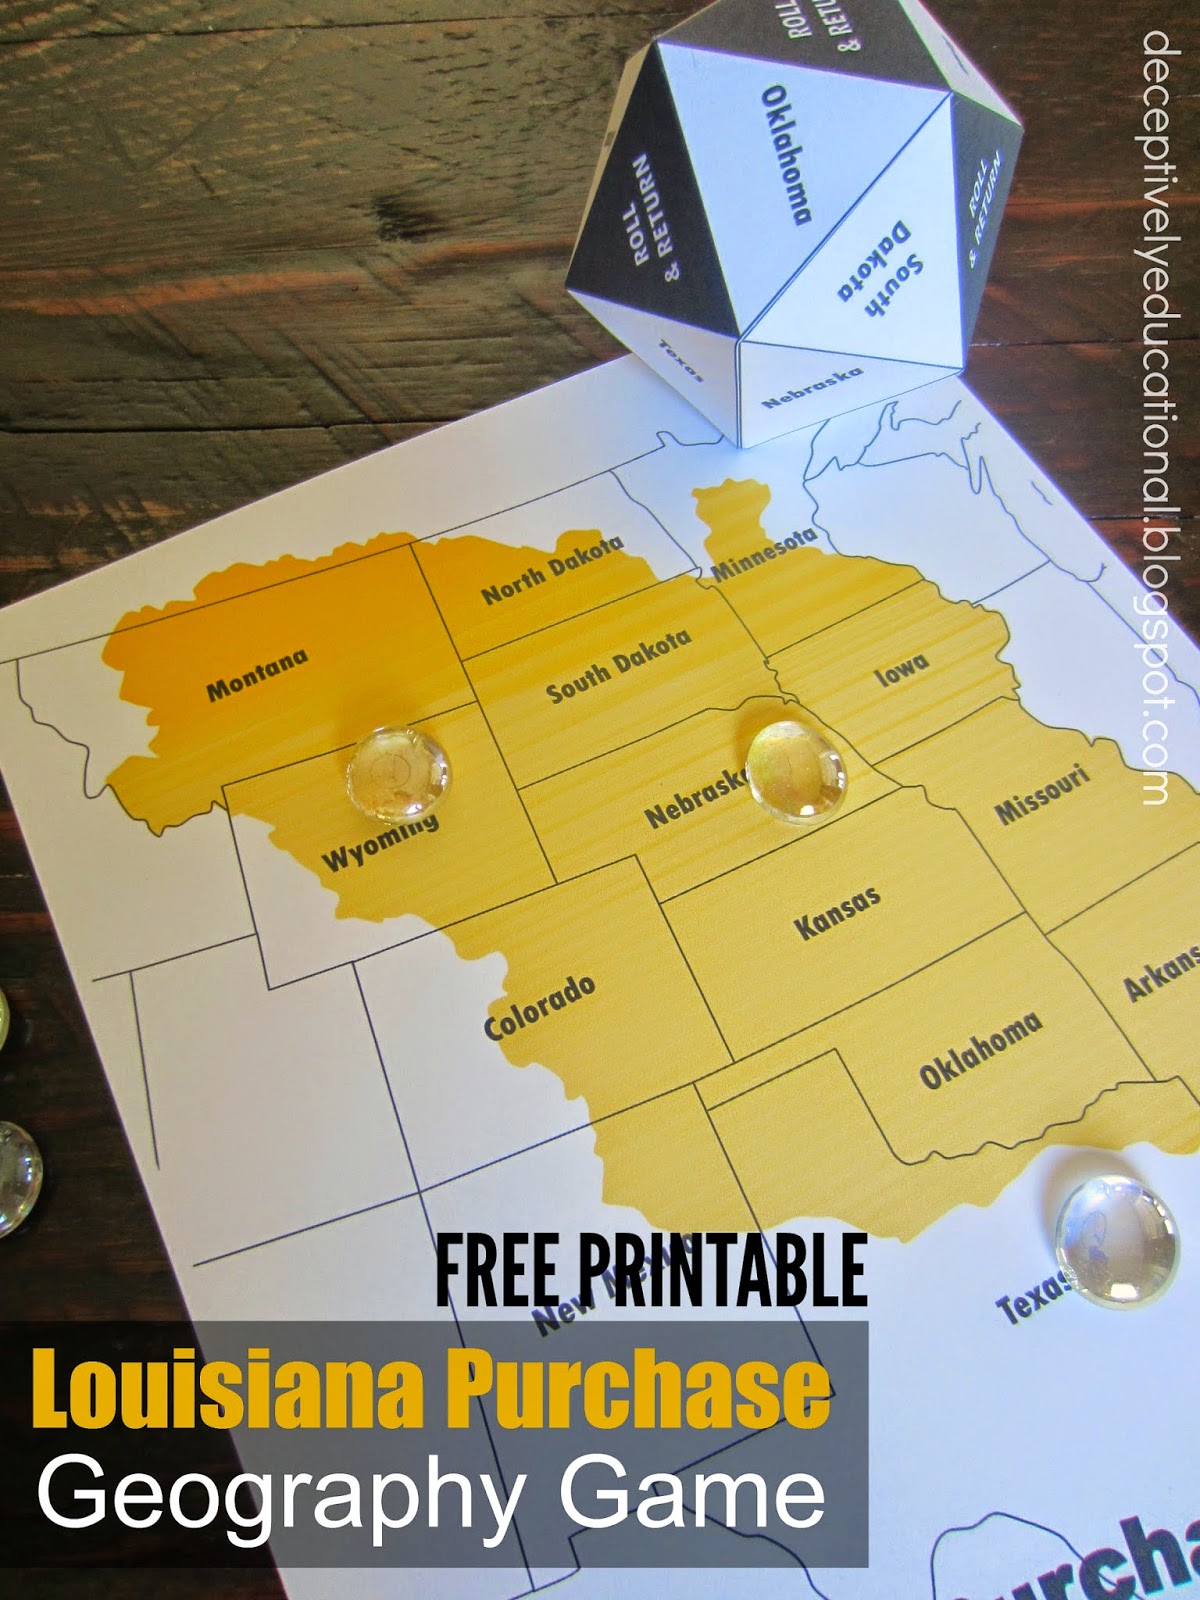 Louisiana Purchase Geography Game | Relentlessly Fun, Deceptively Educational | Bloglovin’